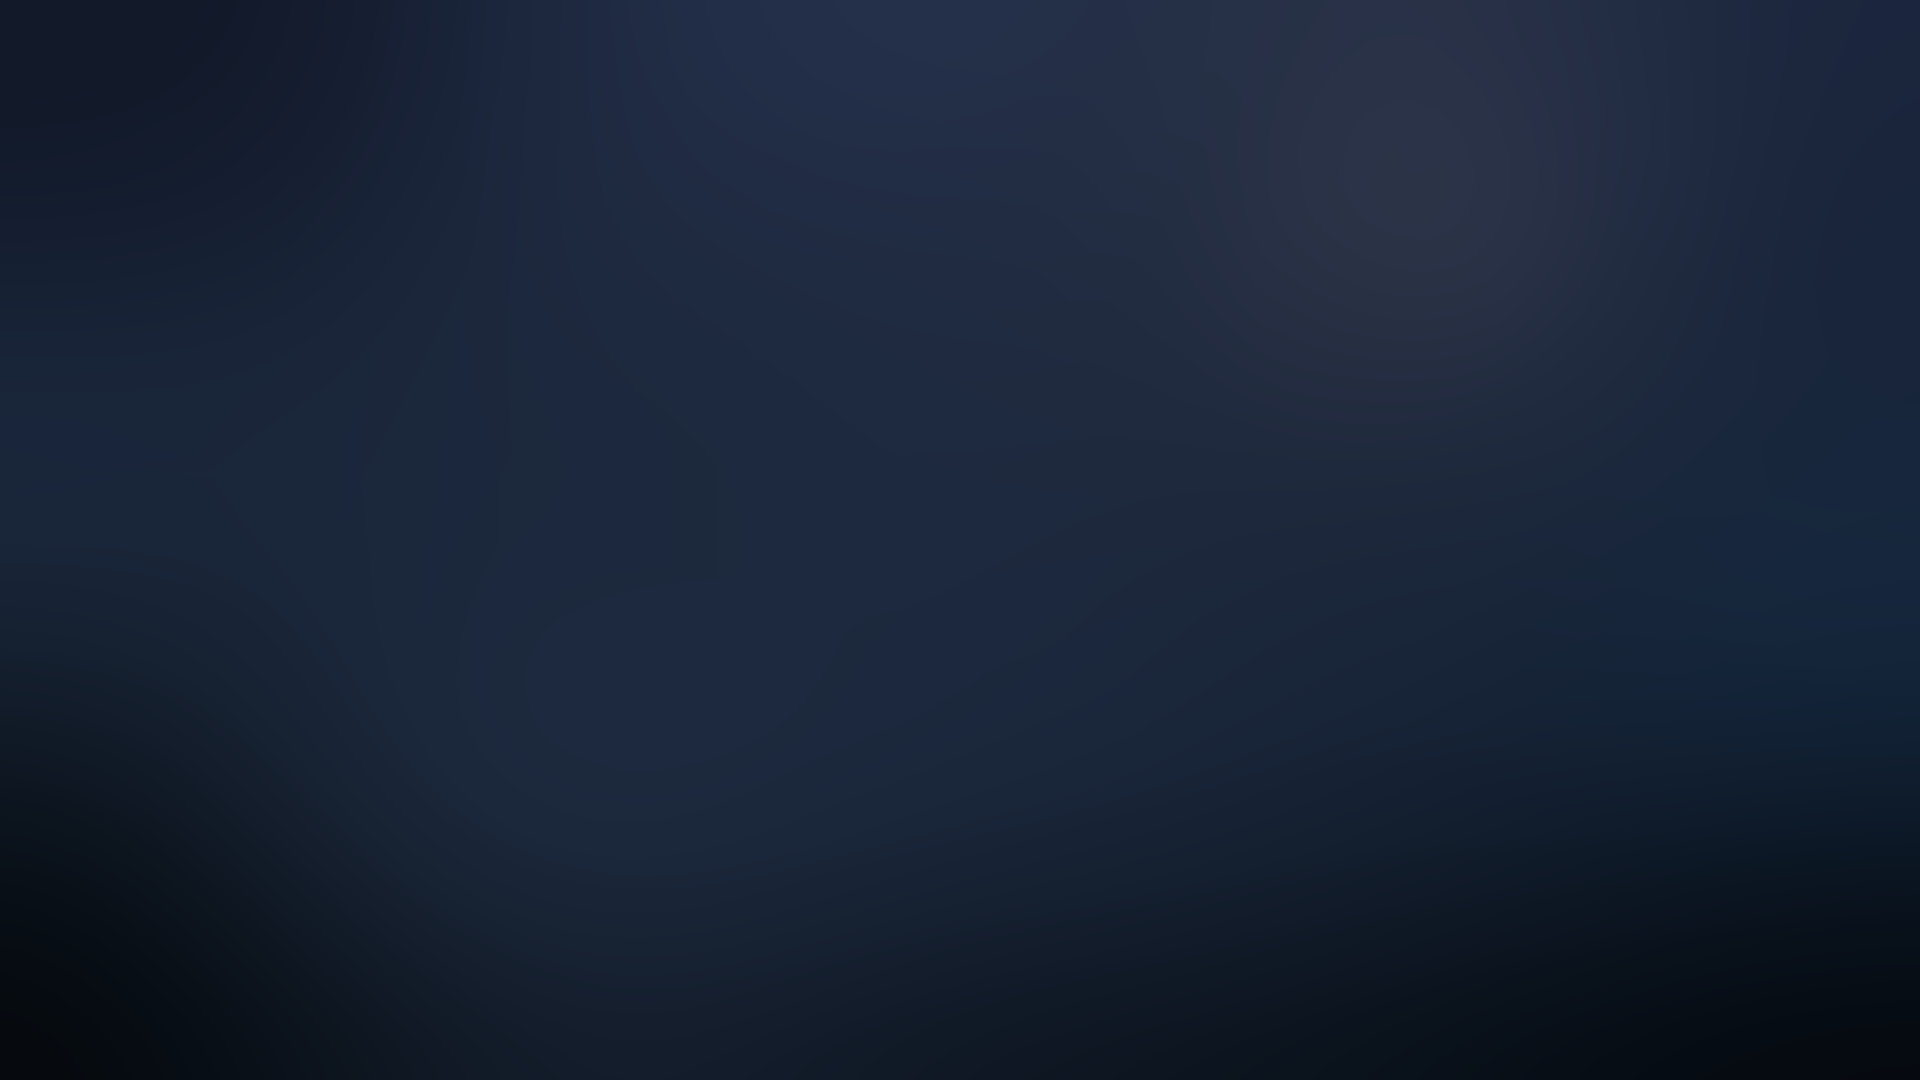 Wallpaper For Navy Blue Gradient Background